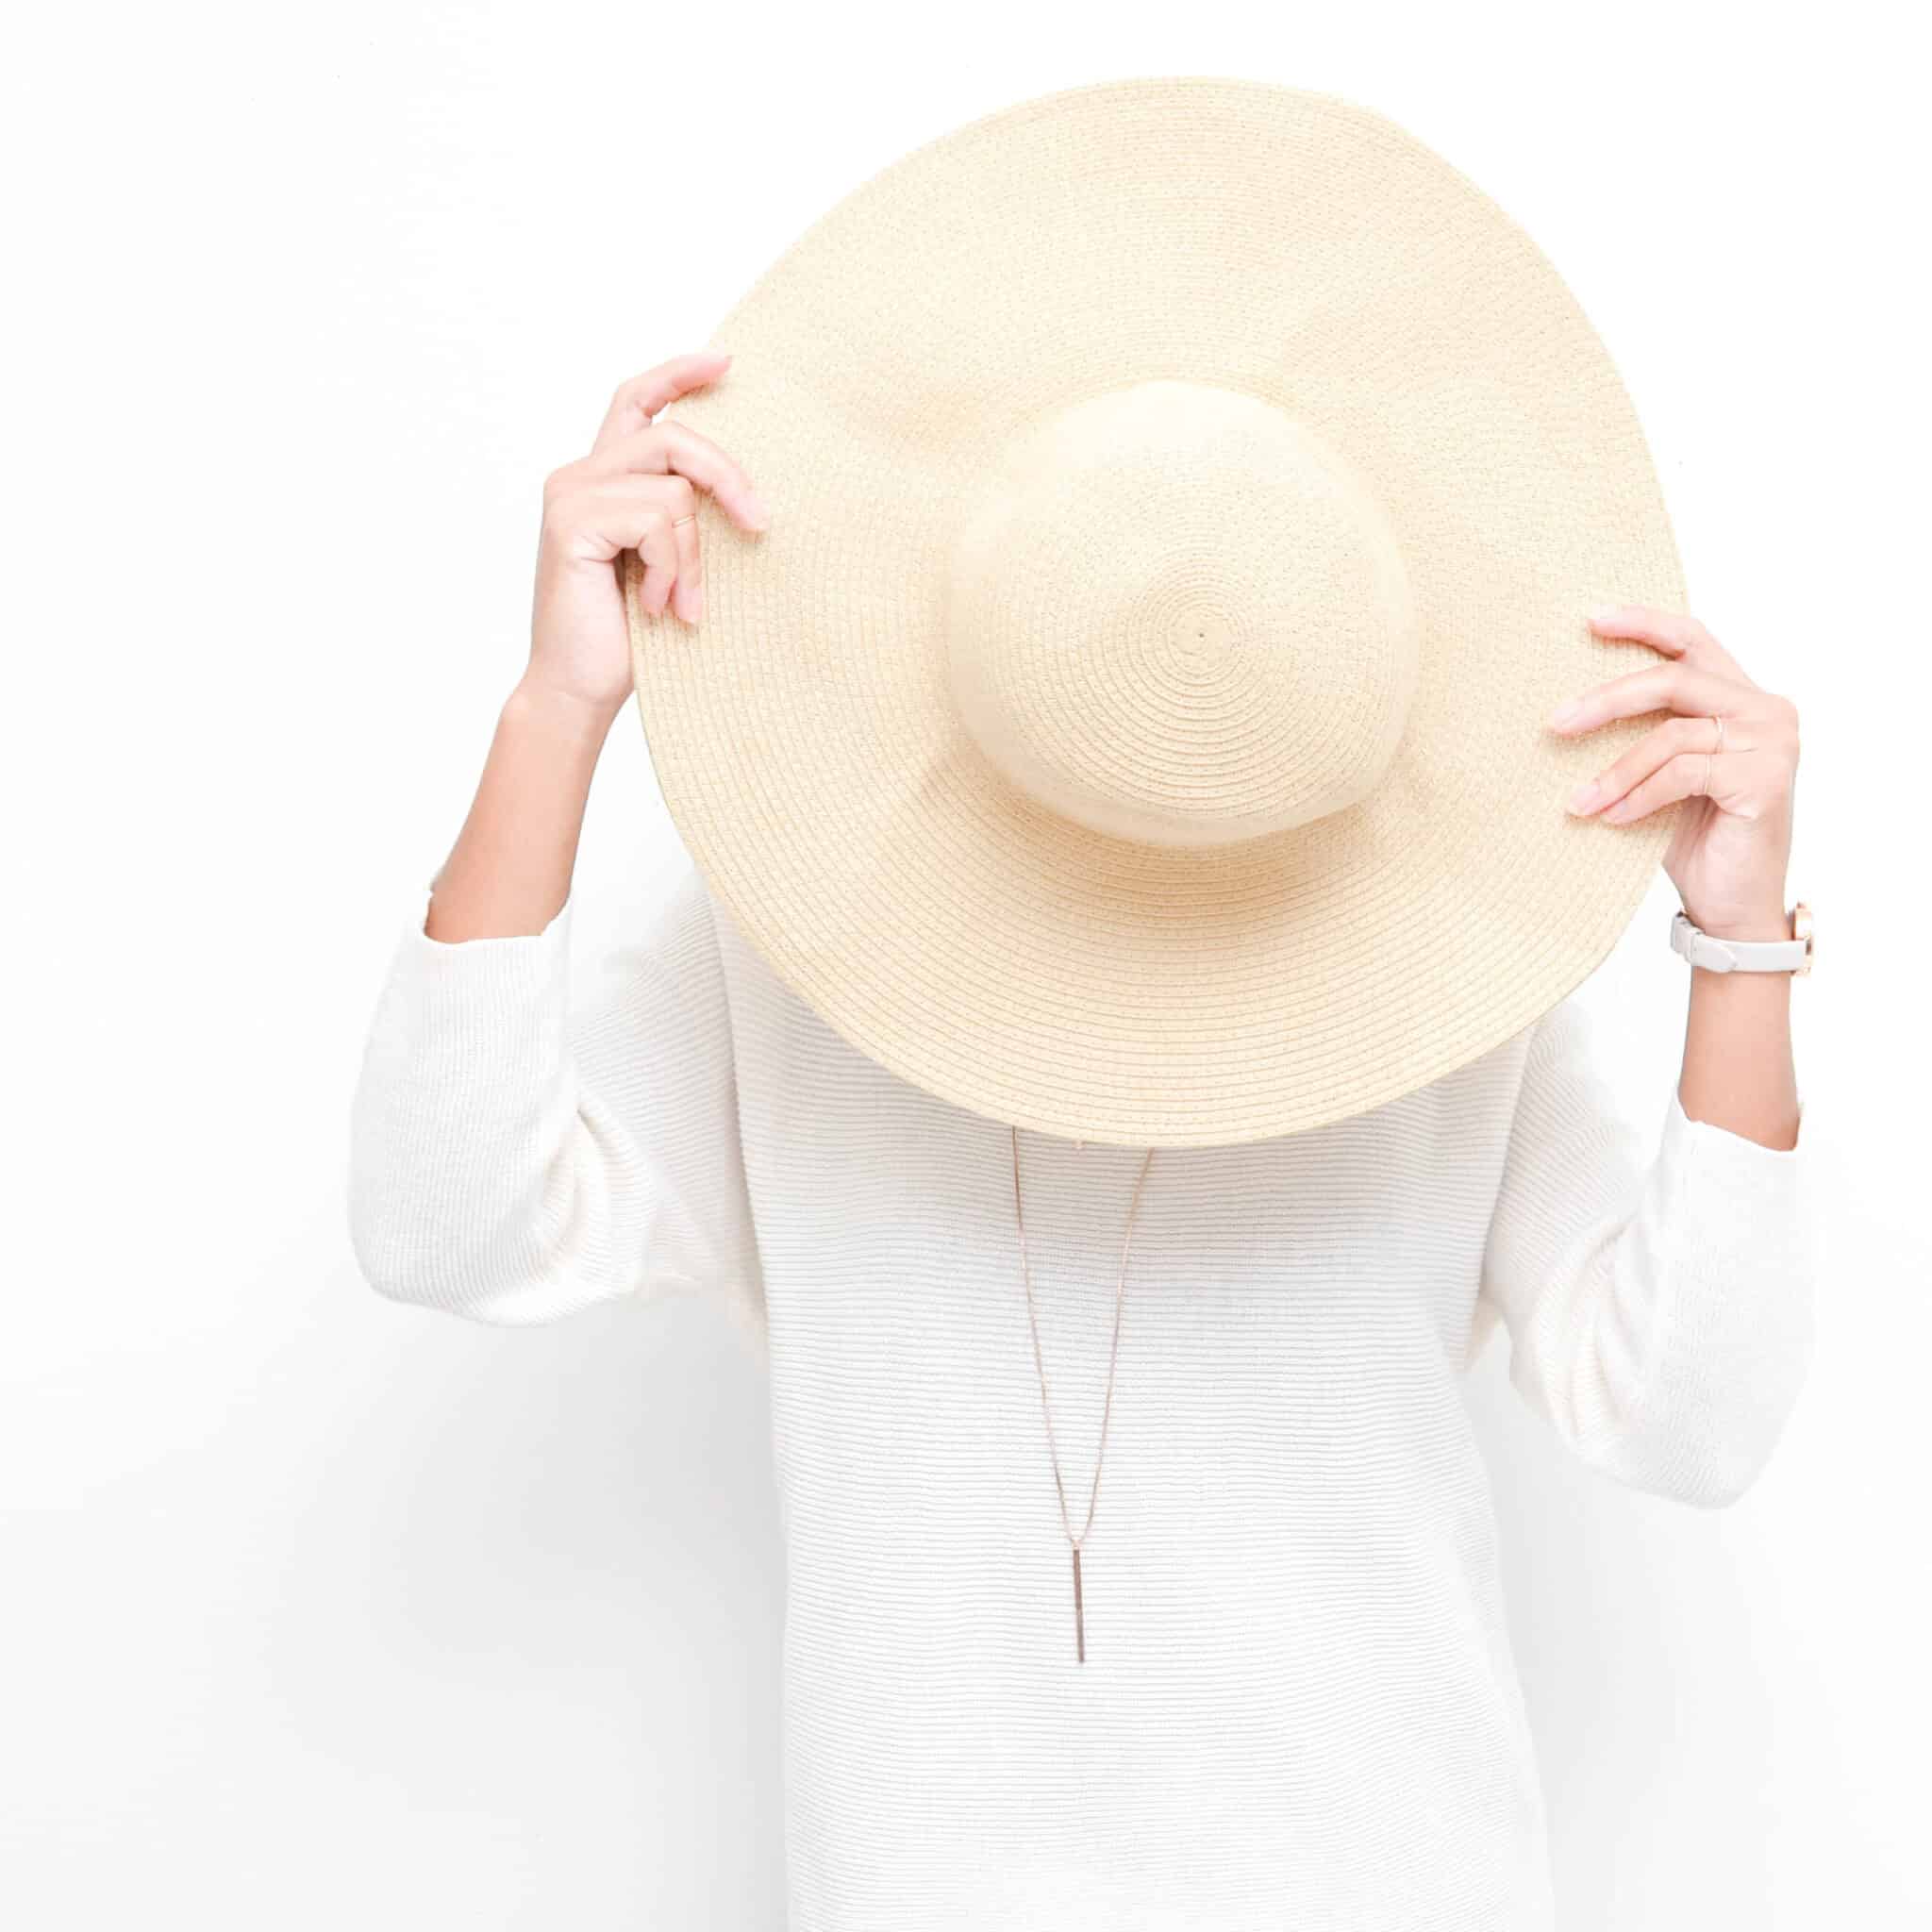 woman holding light colored sun hat in front of her face